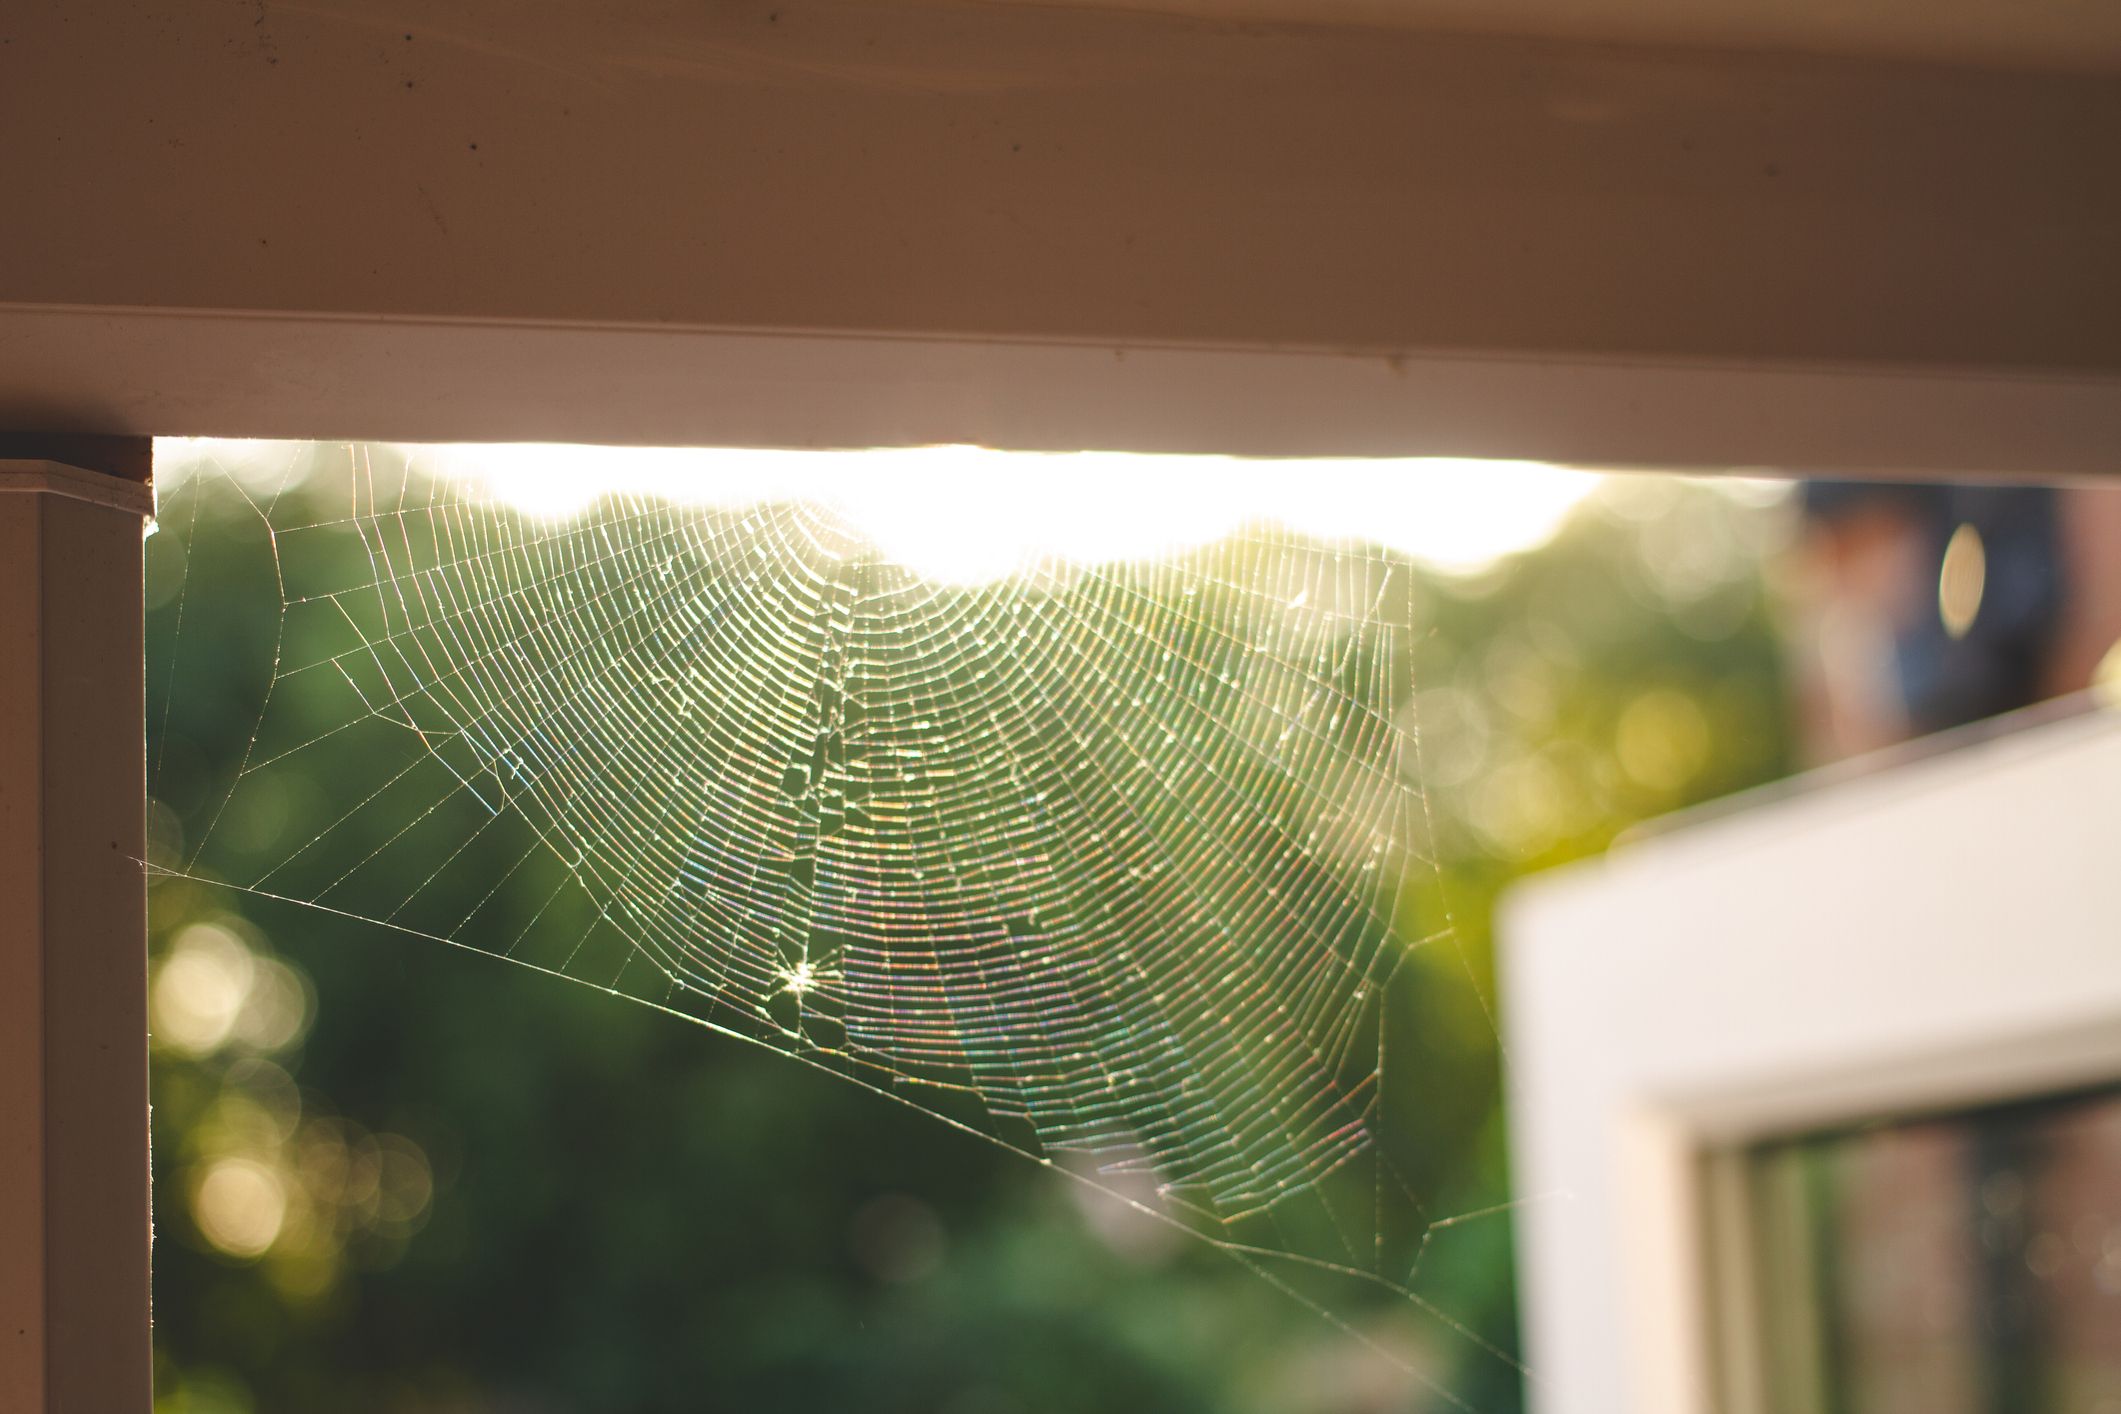 How To Get Rid of Spiders In Your House